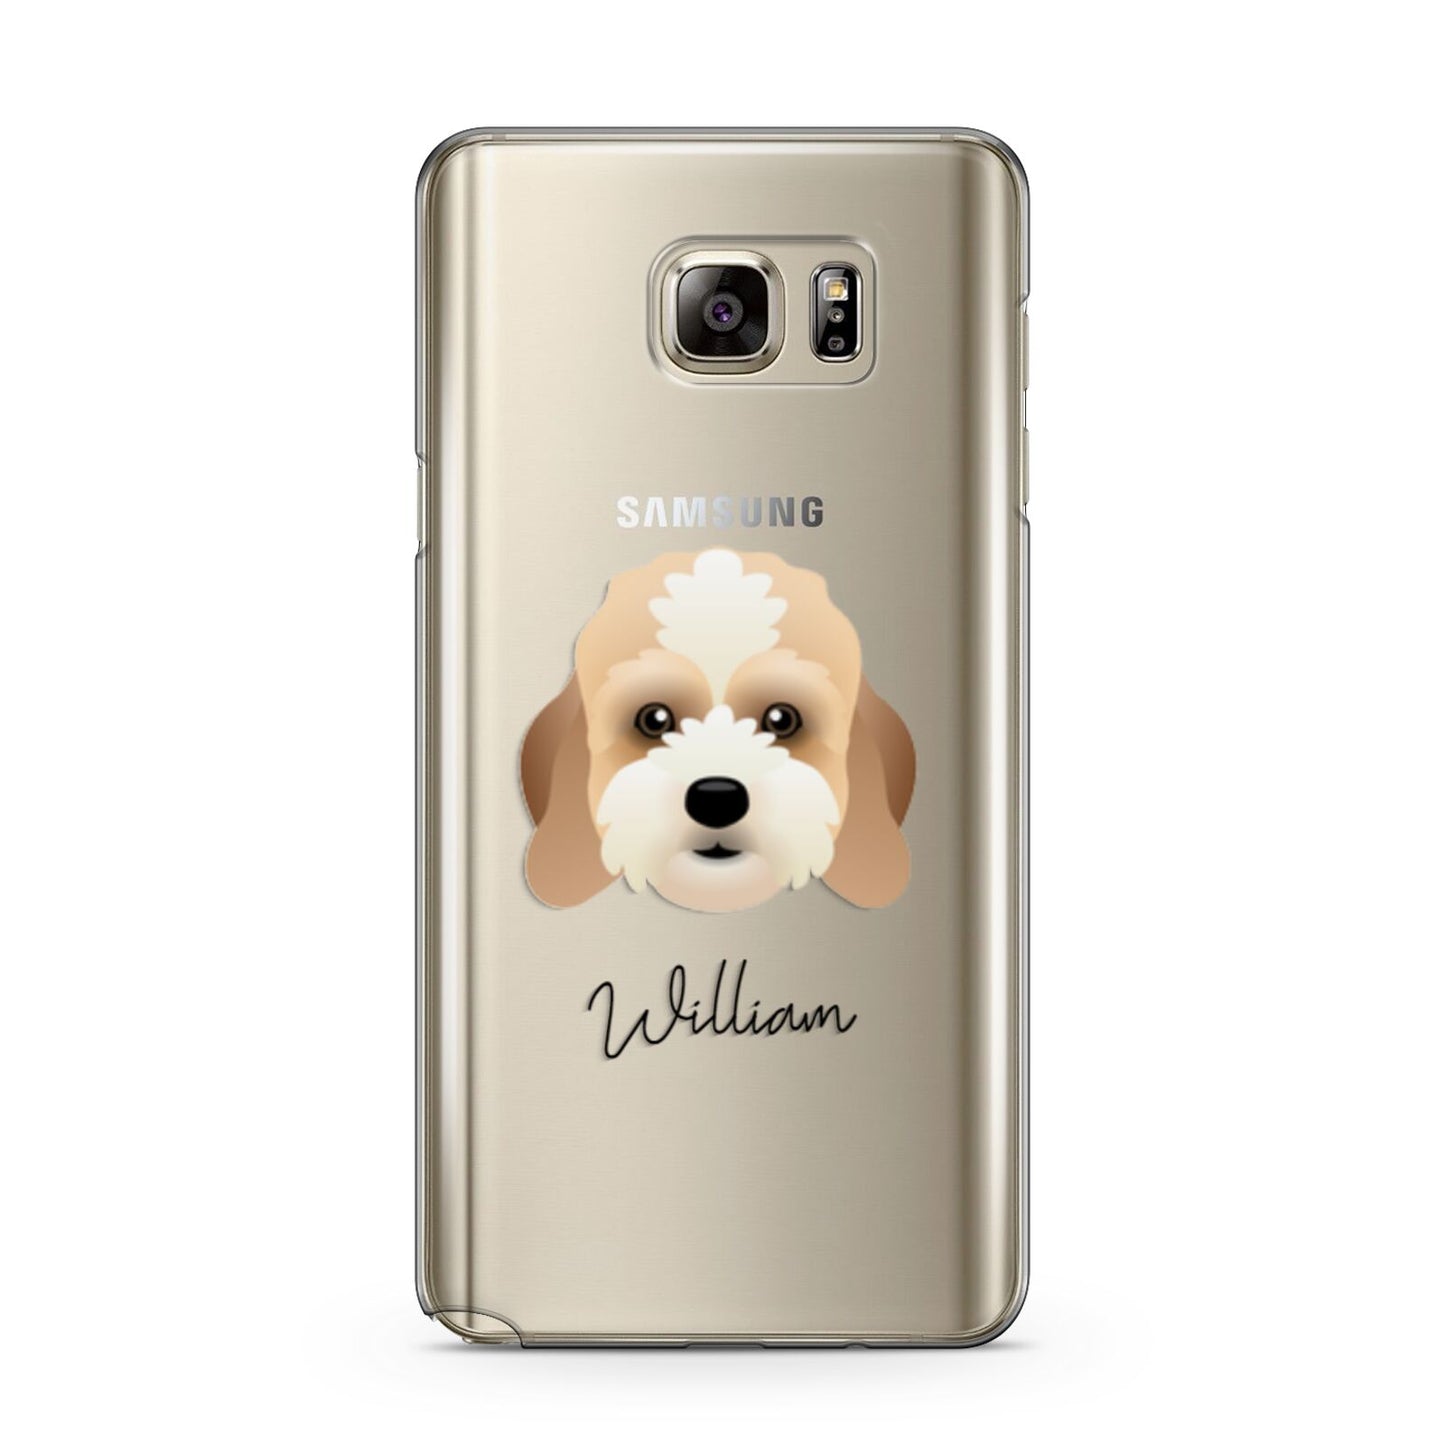 Lhasapoo Personalised Samsung Galaxy Note 5 Case